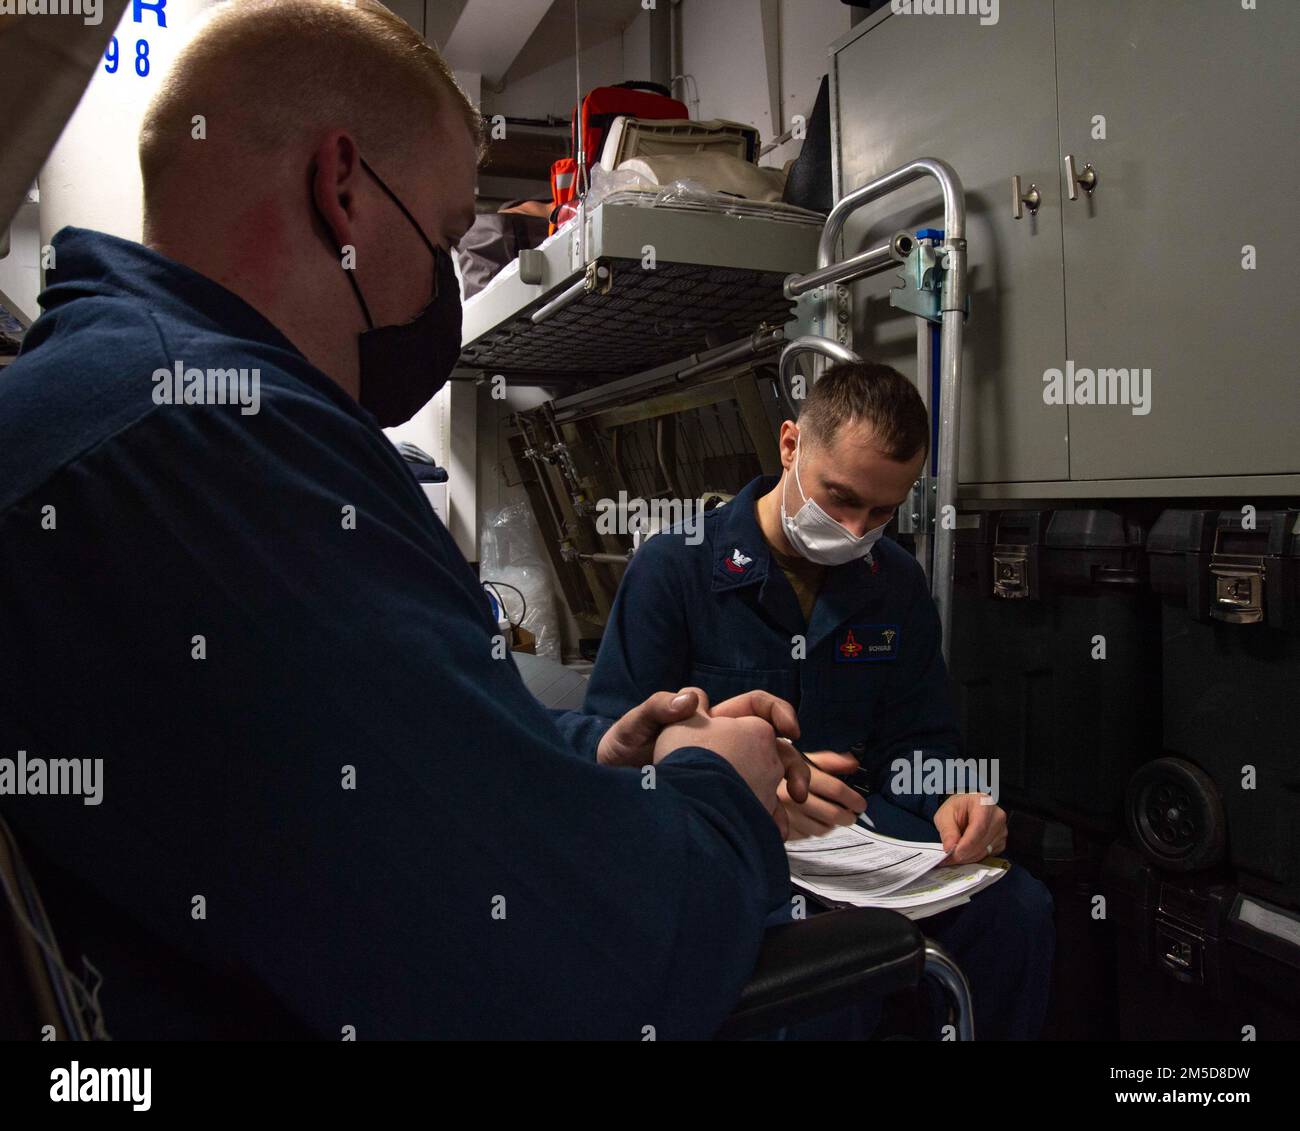 220303-N-WD859-1028 ATLANTIC OCEAN (March 3, 2022) Hospital Corpsman 2nd Class Joshua Schwab, right, conducts a physical health assessment with Machinist’s Mate 1st Class Jeremy Fredell aboard the aircraft carrier USS George H.W. Bush. George H.W. Bush provides the national command authority flexible, tailorable war fighting capability through the carrier strike group that maintains maritime stability and security in order to ensure access, deter aggression and defend U.S., allied and partner interests. Stock Photo